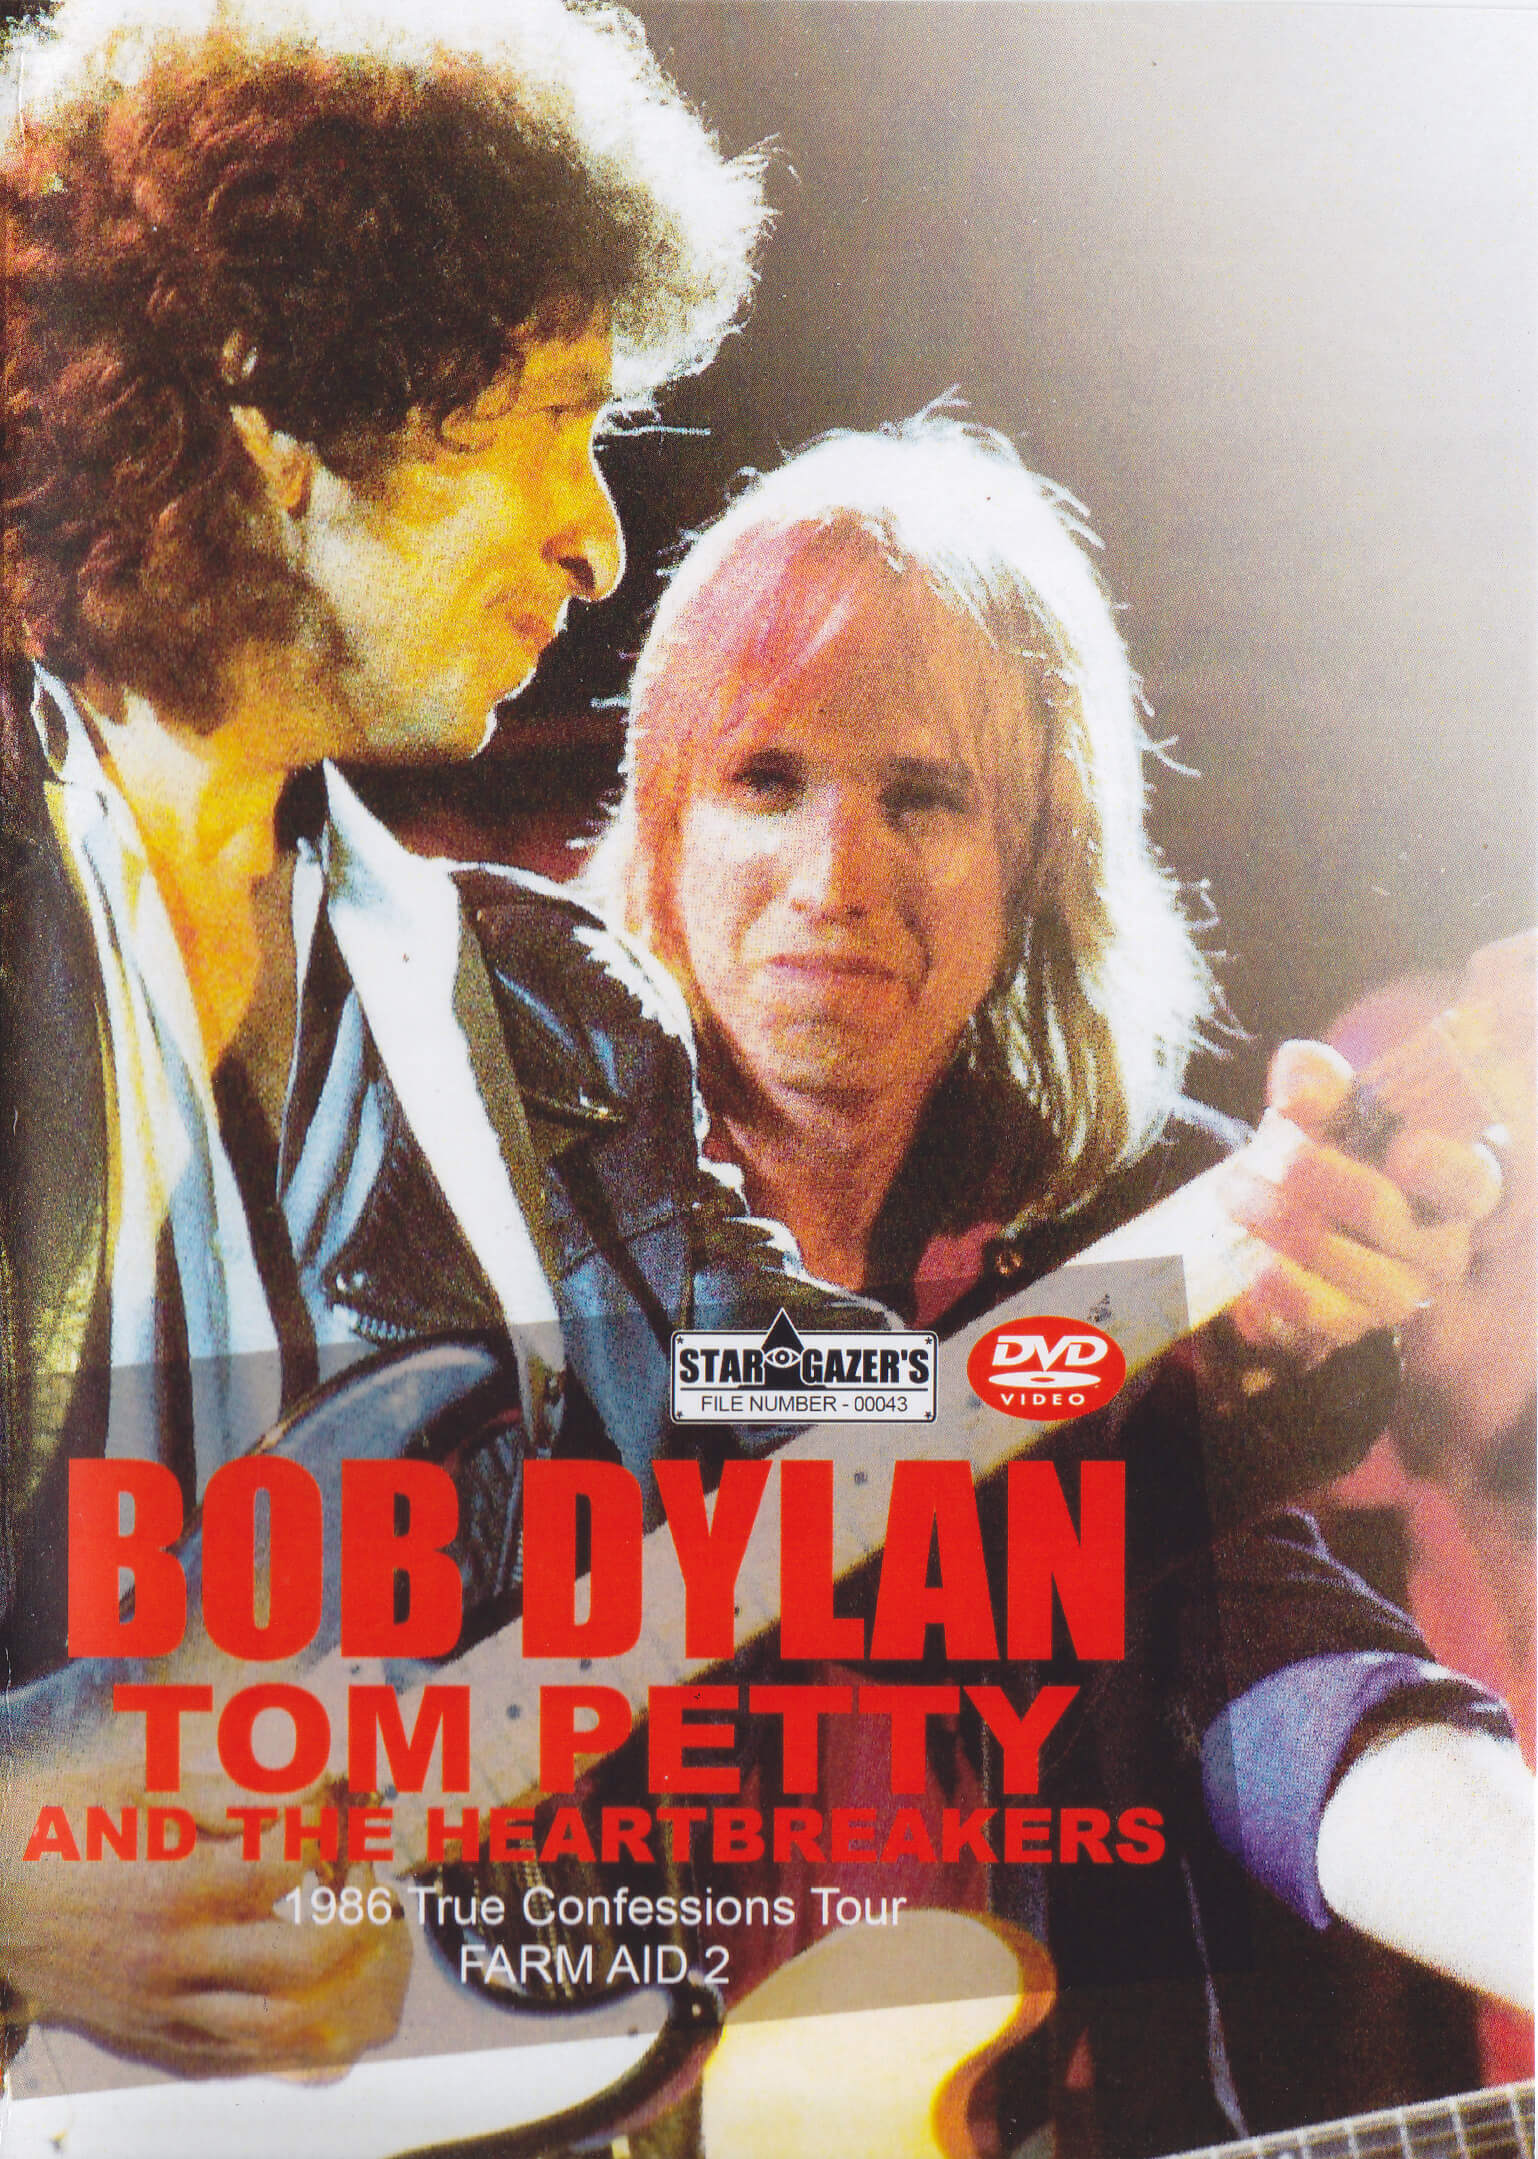 Bob Dylan With Tom Petty And The Heartbreakers / Farm Aid 2 